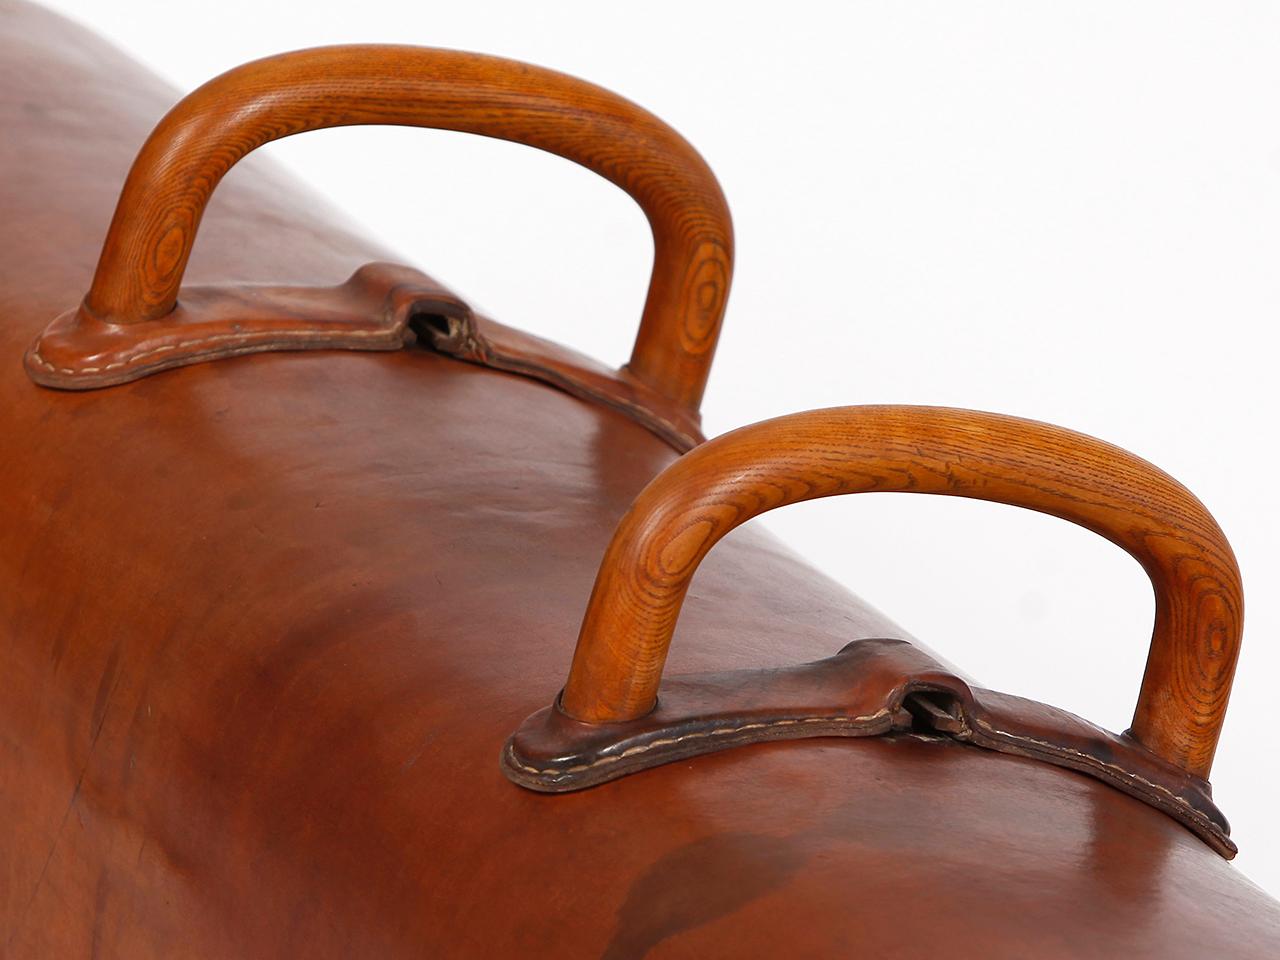 Pommel horse from former Czechoslovakia. It has been shortened to a height of 53 cm. The iron feet are preserved. The thick leather has been cleaned and preserved, restored wood surface and the patina was retained the wooden handles were restored